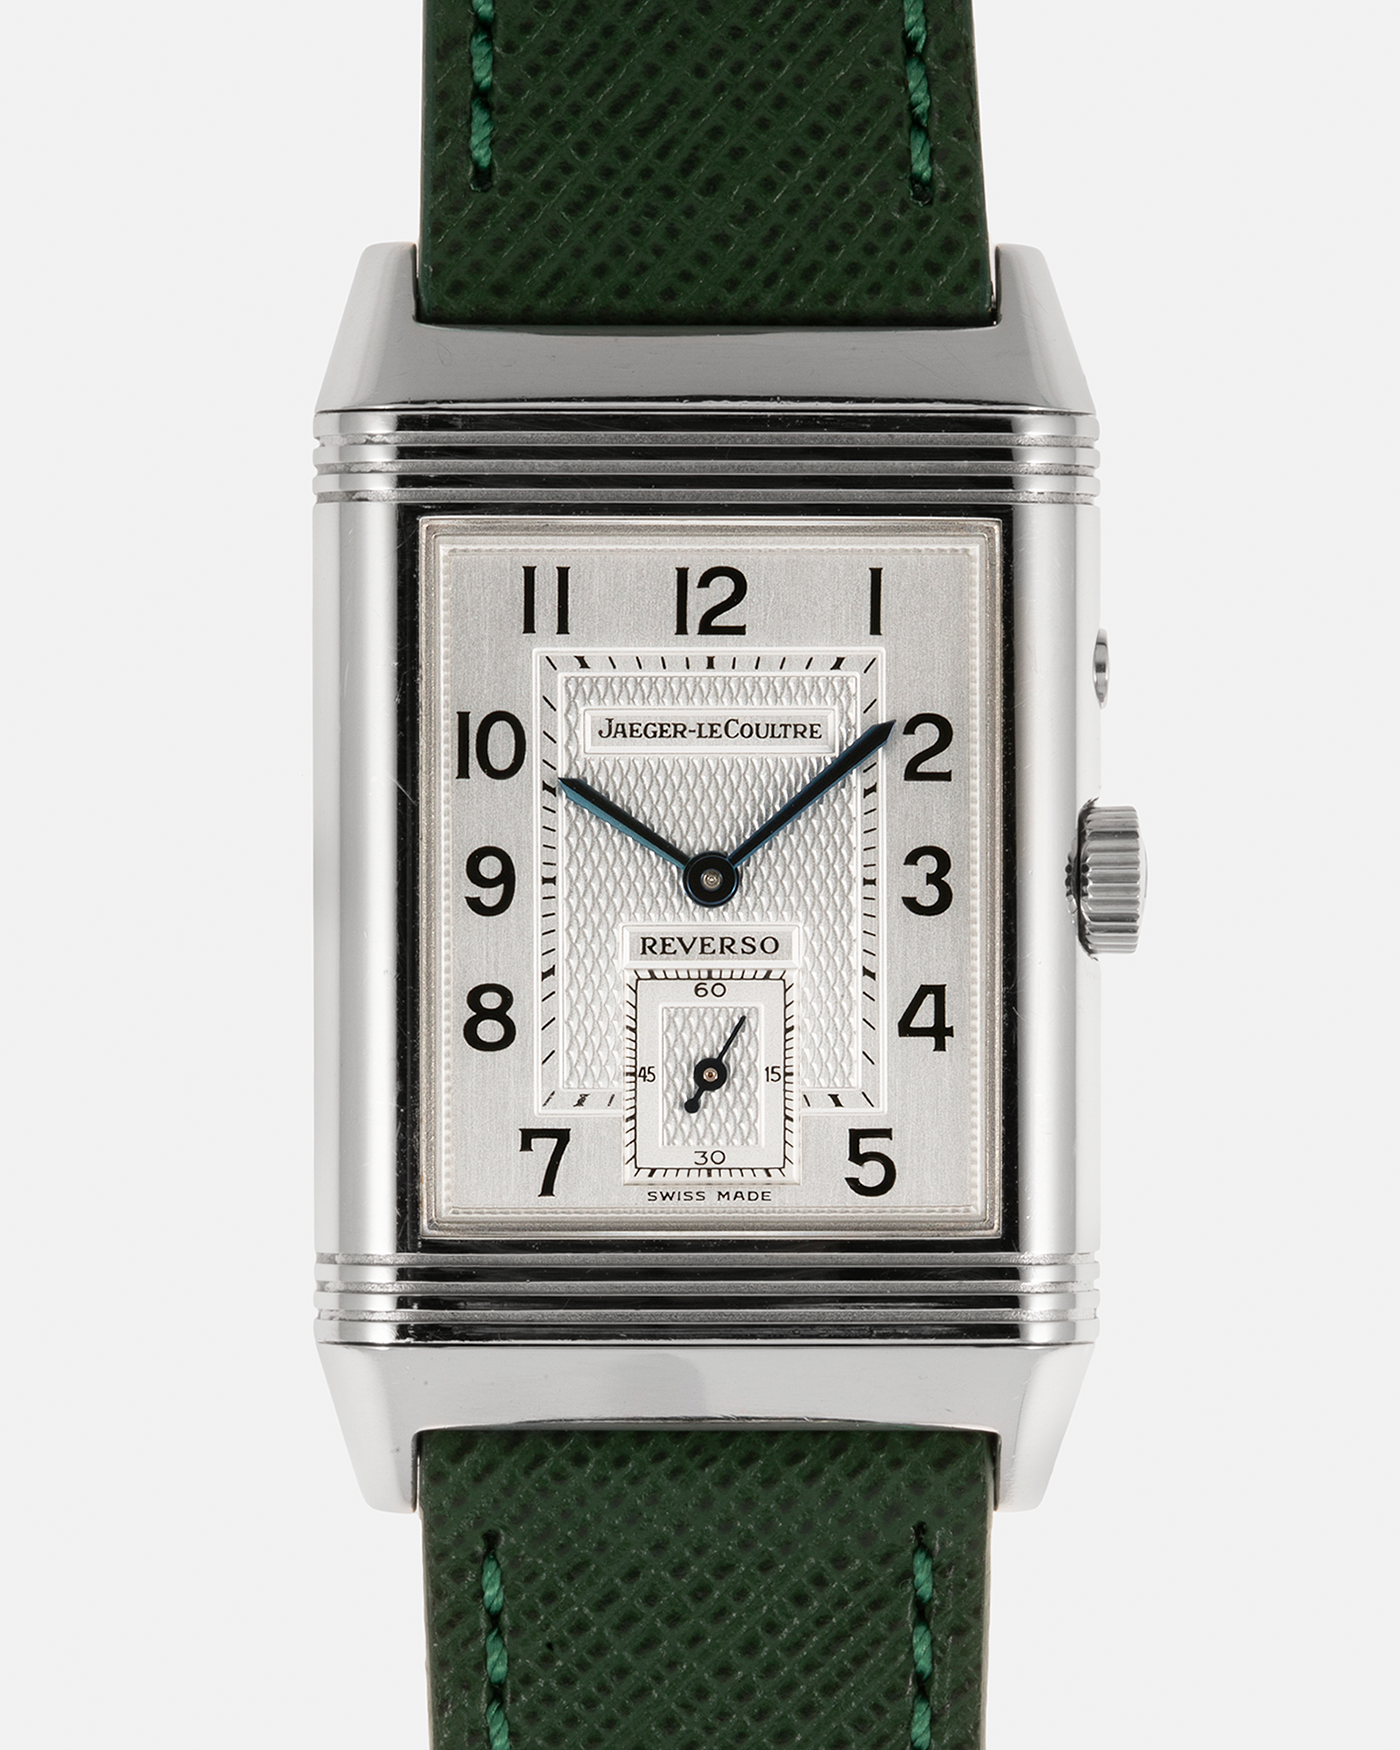 Brand: Jaeger LeCoultre Year: 2000s Model: Reverso Duoface Japan Edition Green, Limited Edition of 300 Pieces Reference Number: 270.8.54 Material: Stainless Steel Movement: Jaeger LeCoultre Cal. 854, Manual-Winding Case Diameter: 42mm x 26mm Lug Width: 19mm Strap: Molequin Hunter Green Textured Calf Leather Strap with Signed Stainless Steel Deployant Clasp, with additional Green Alligator Leather Strap